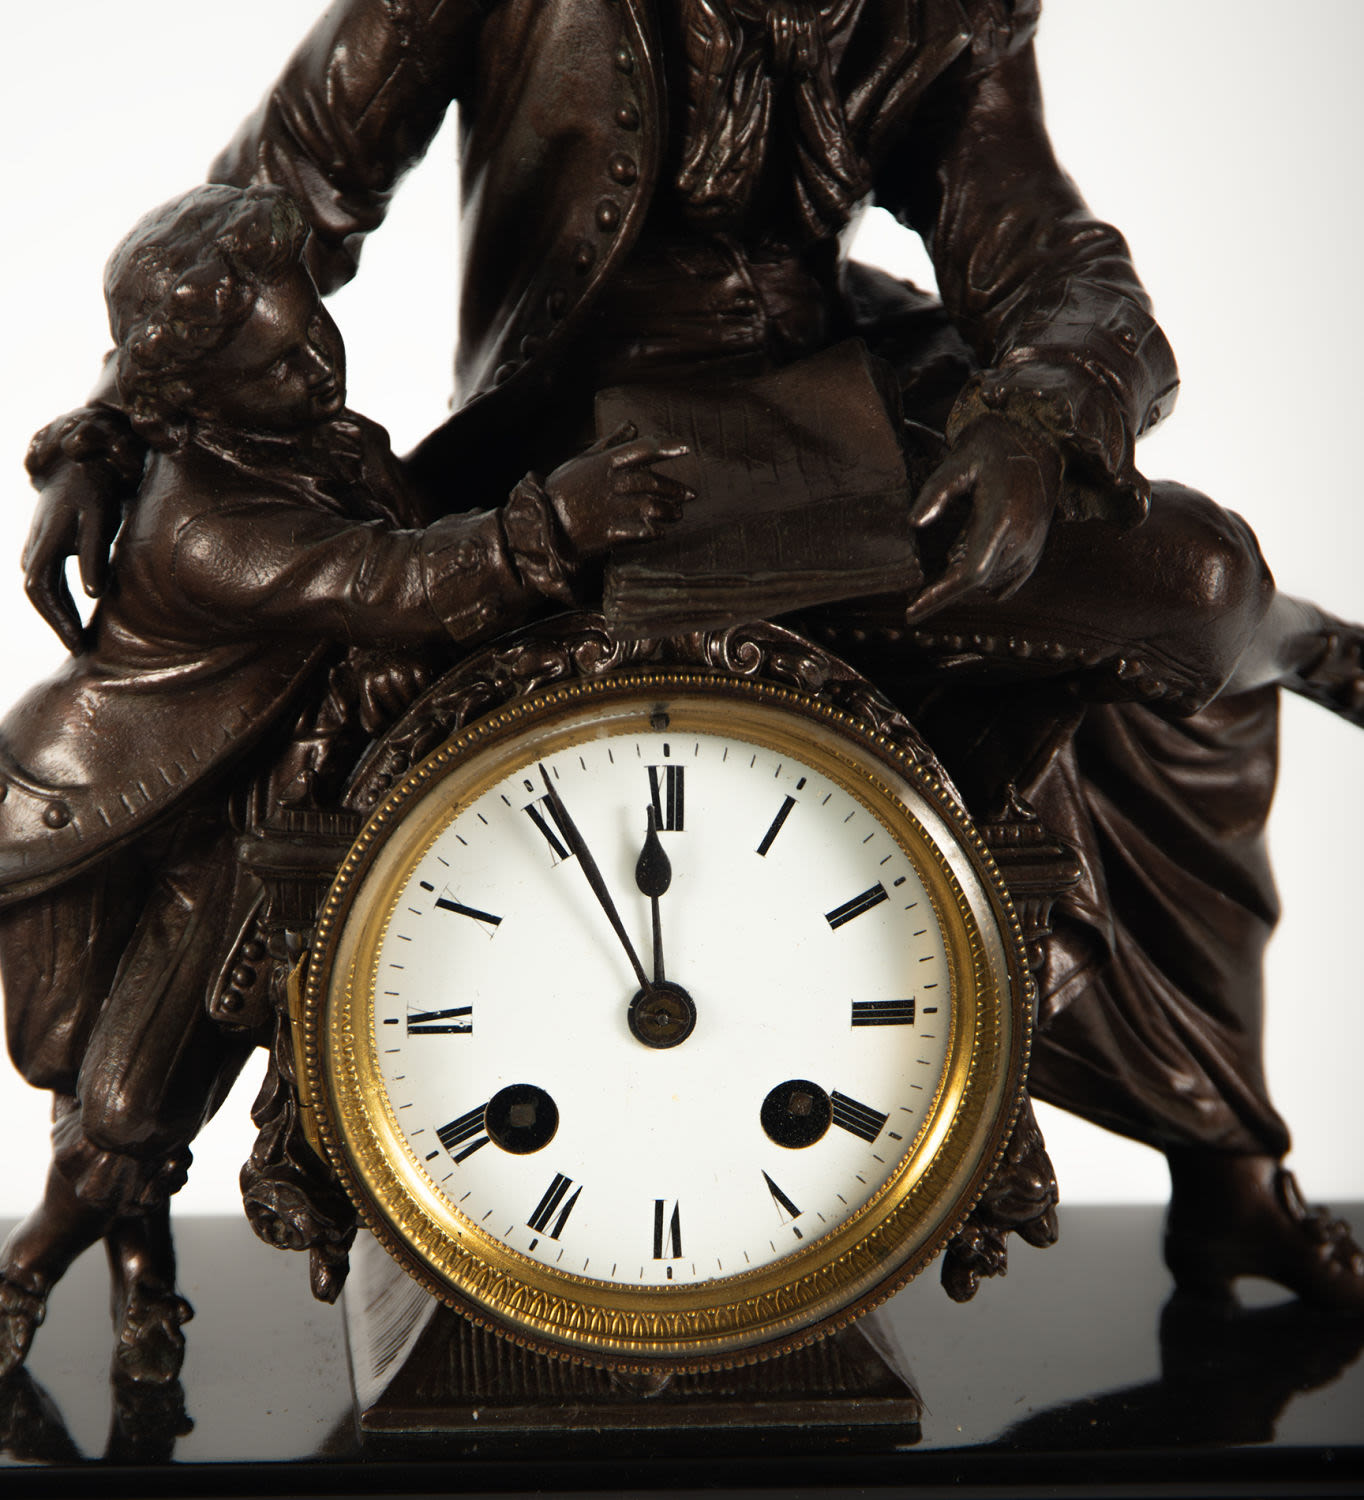 Table clock depicting "The Reading Lesson", 19th century - Image 3 of 6